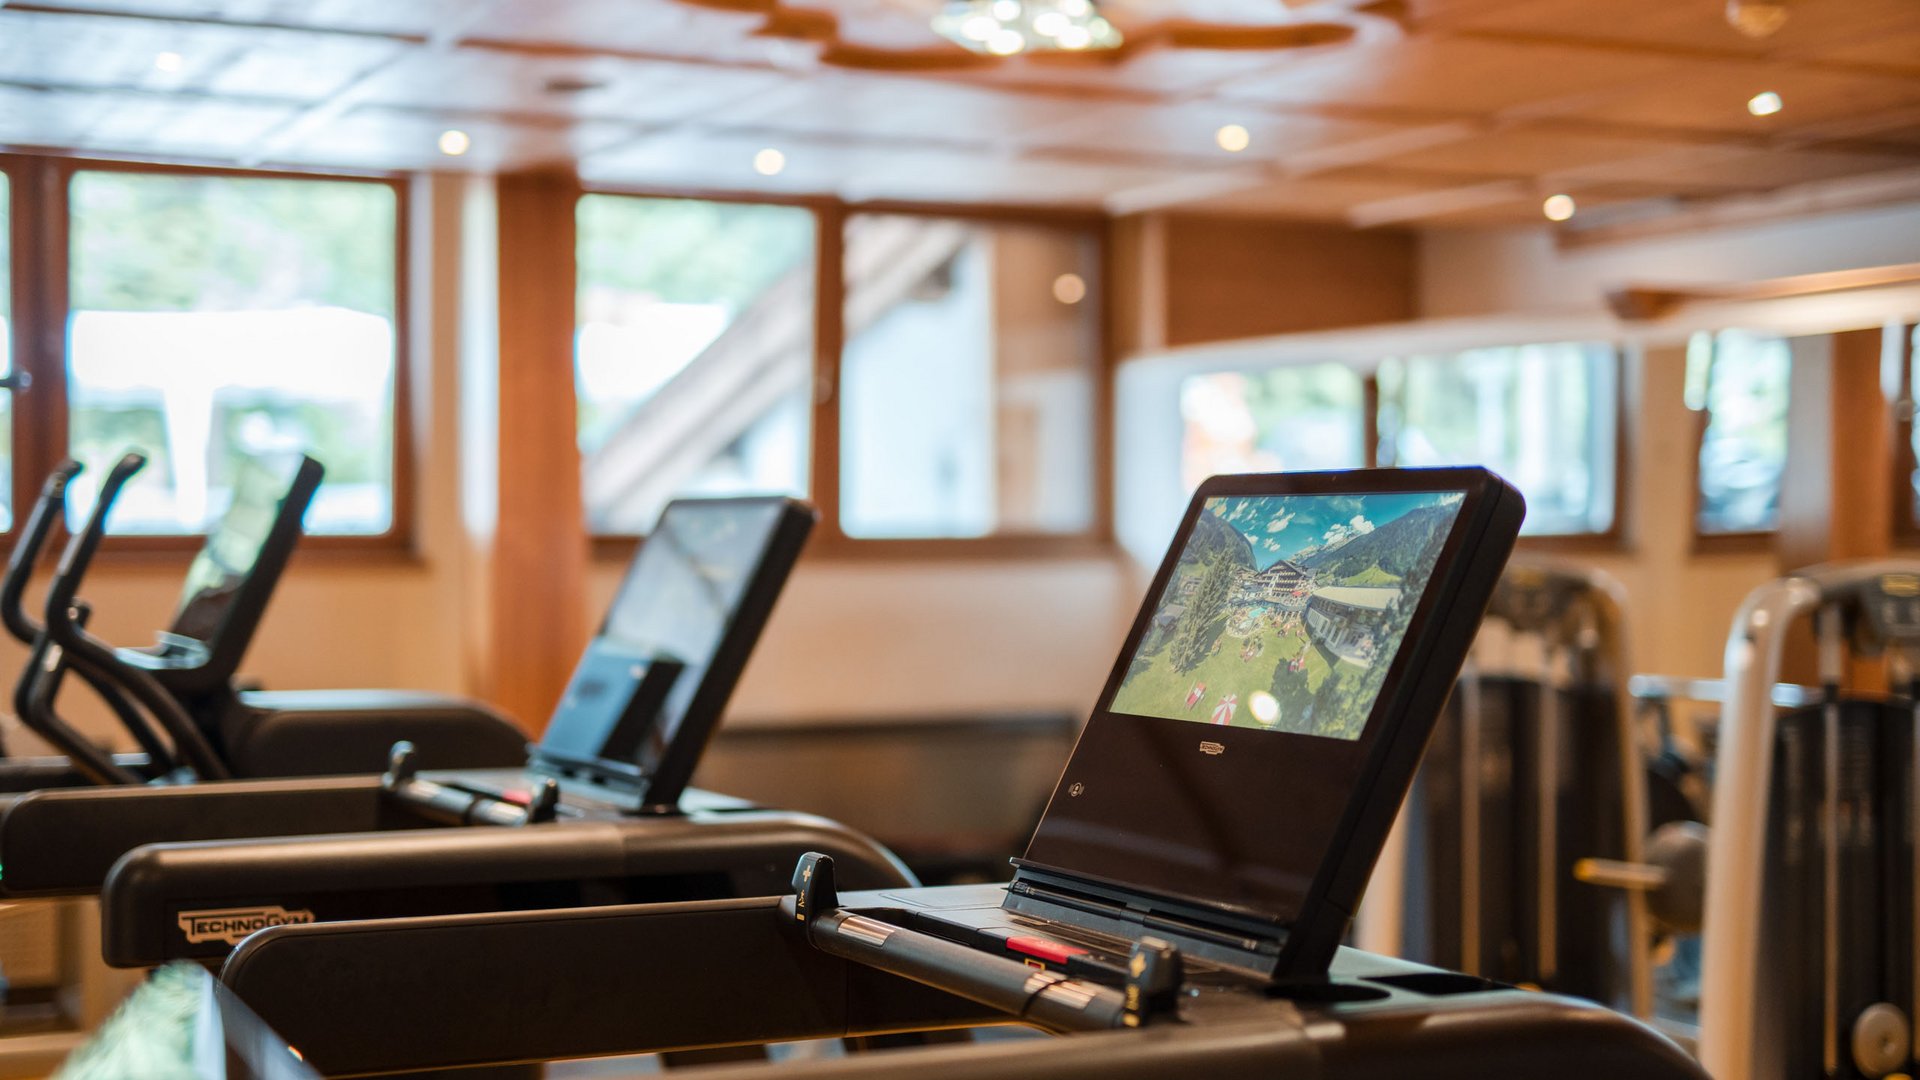 The Jagdhof – your fitness hotel in Austria